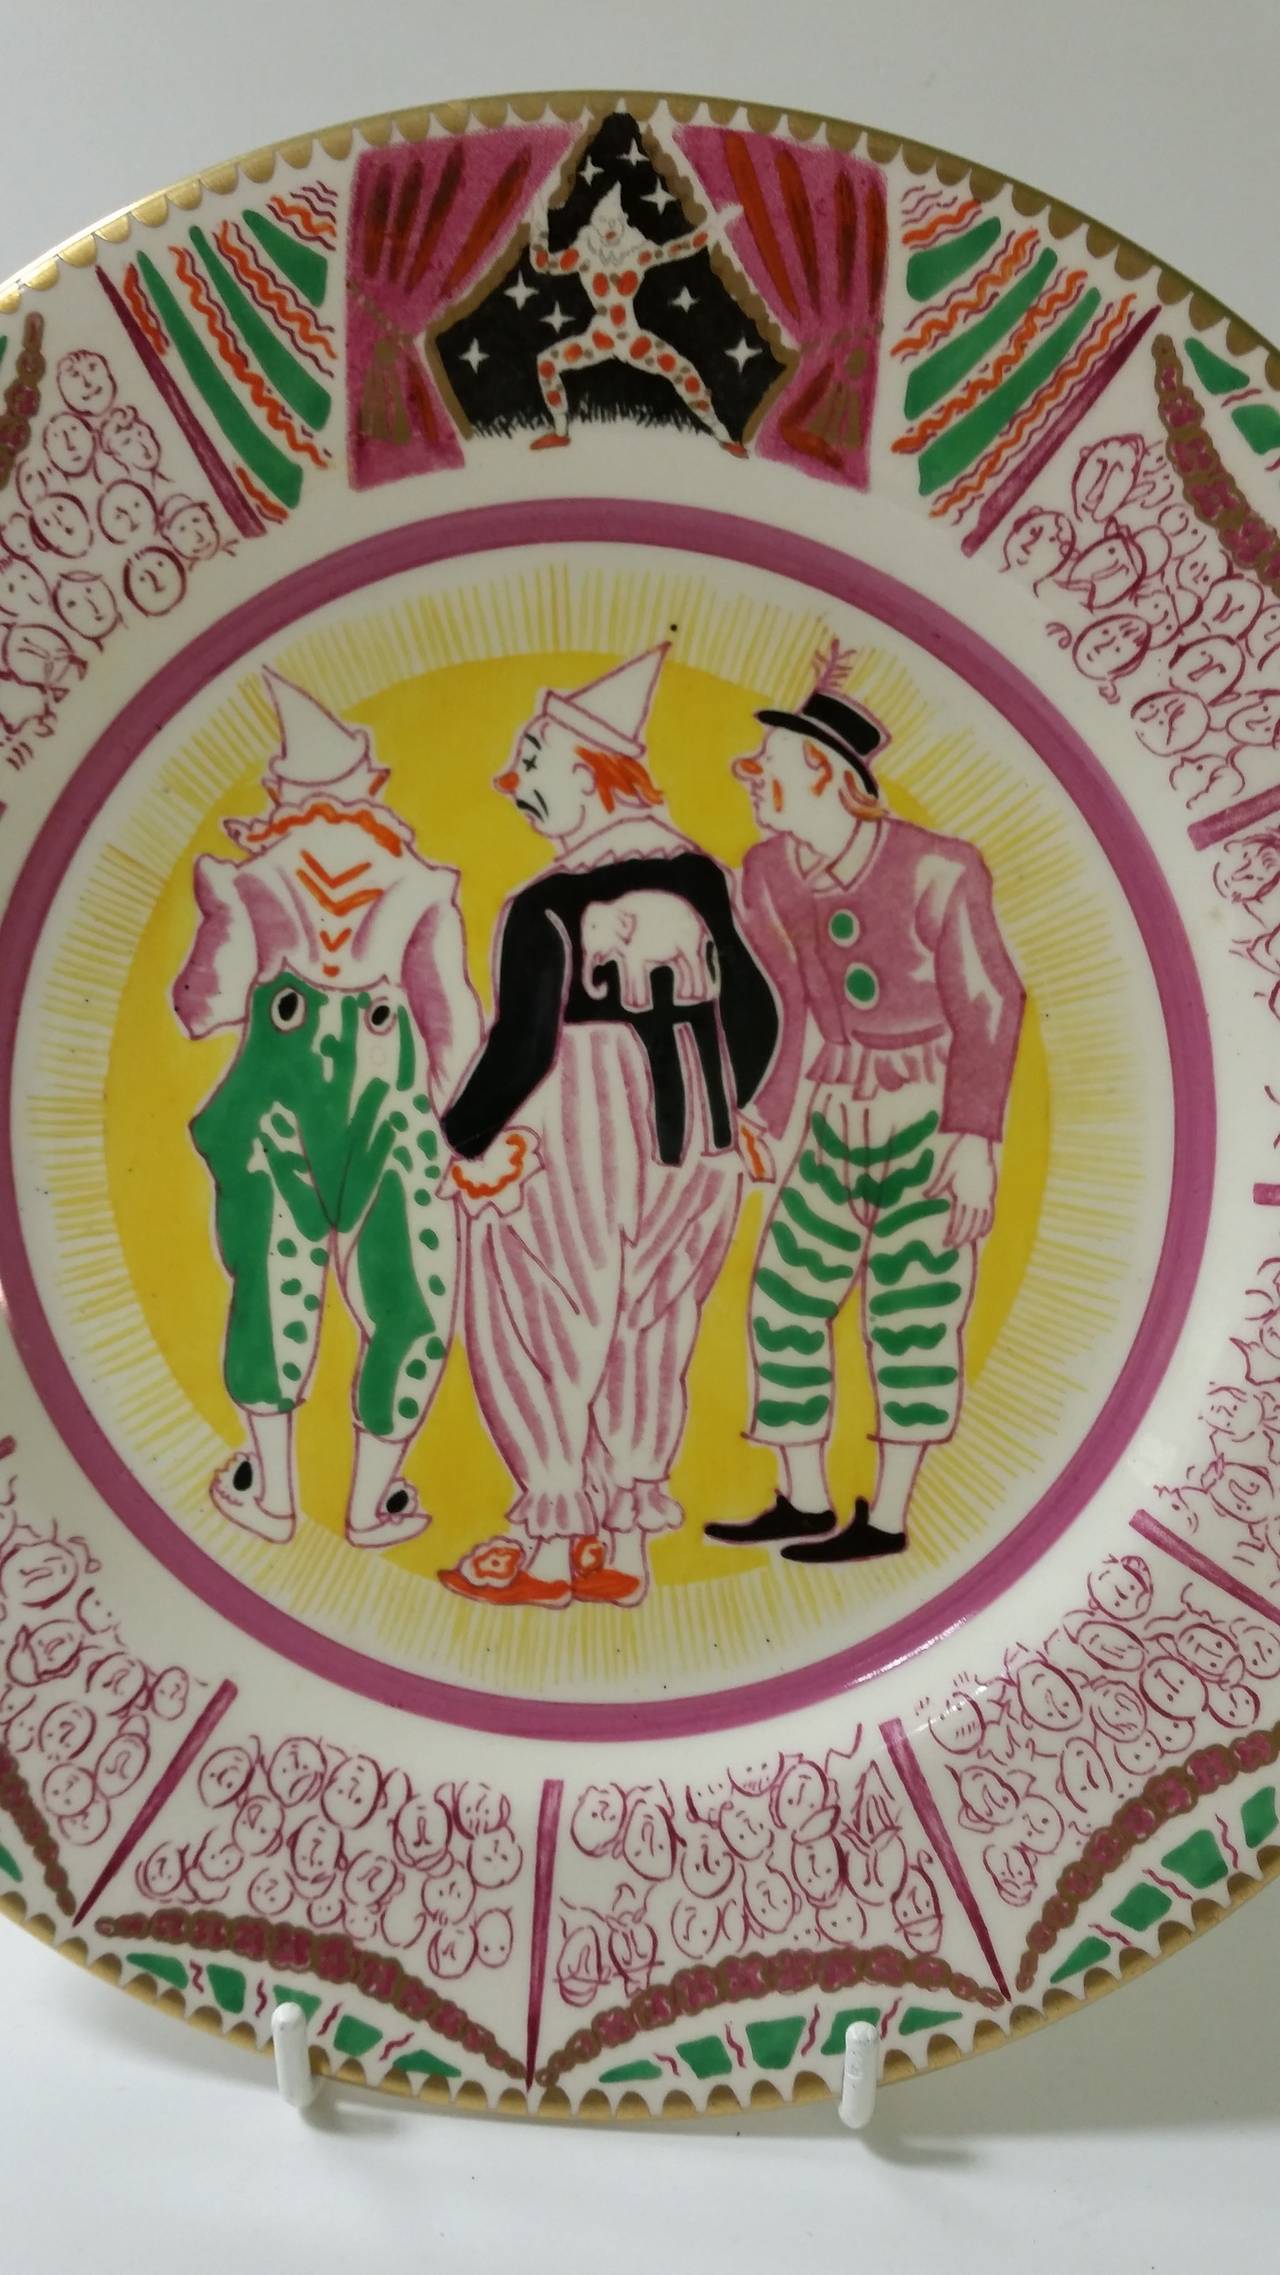 Laura Knight Circus design Plate produced in Bizarre By Clarice Cliff. 
These designs were produced for the 1925 Harrods Exhibition. 
Signed Laura Knight and Clarice Cliff. 
First Edition 1934. 
9 inch Dia
Laura Knight, circus themed plate,